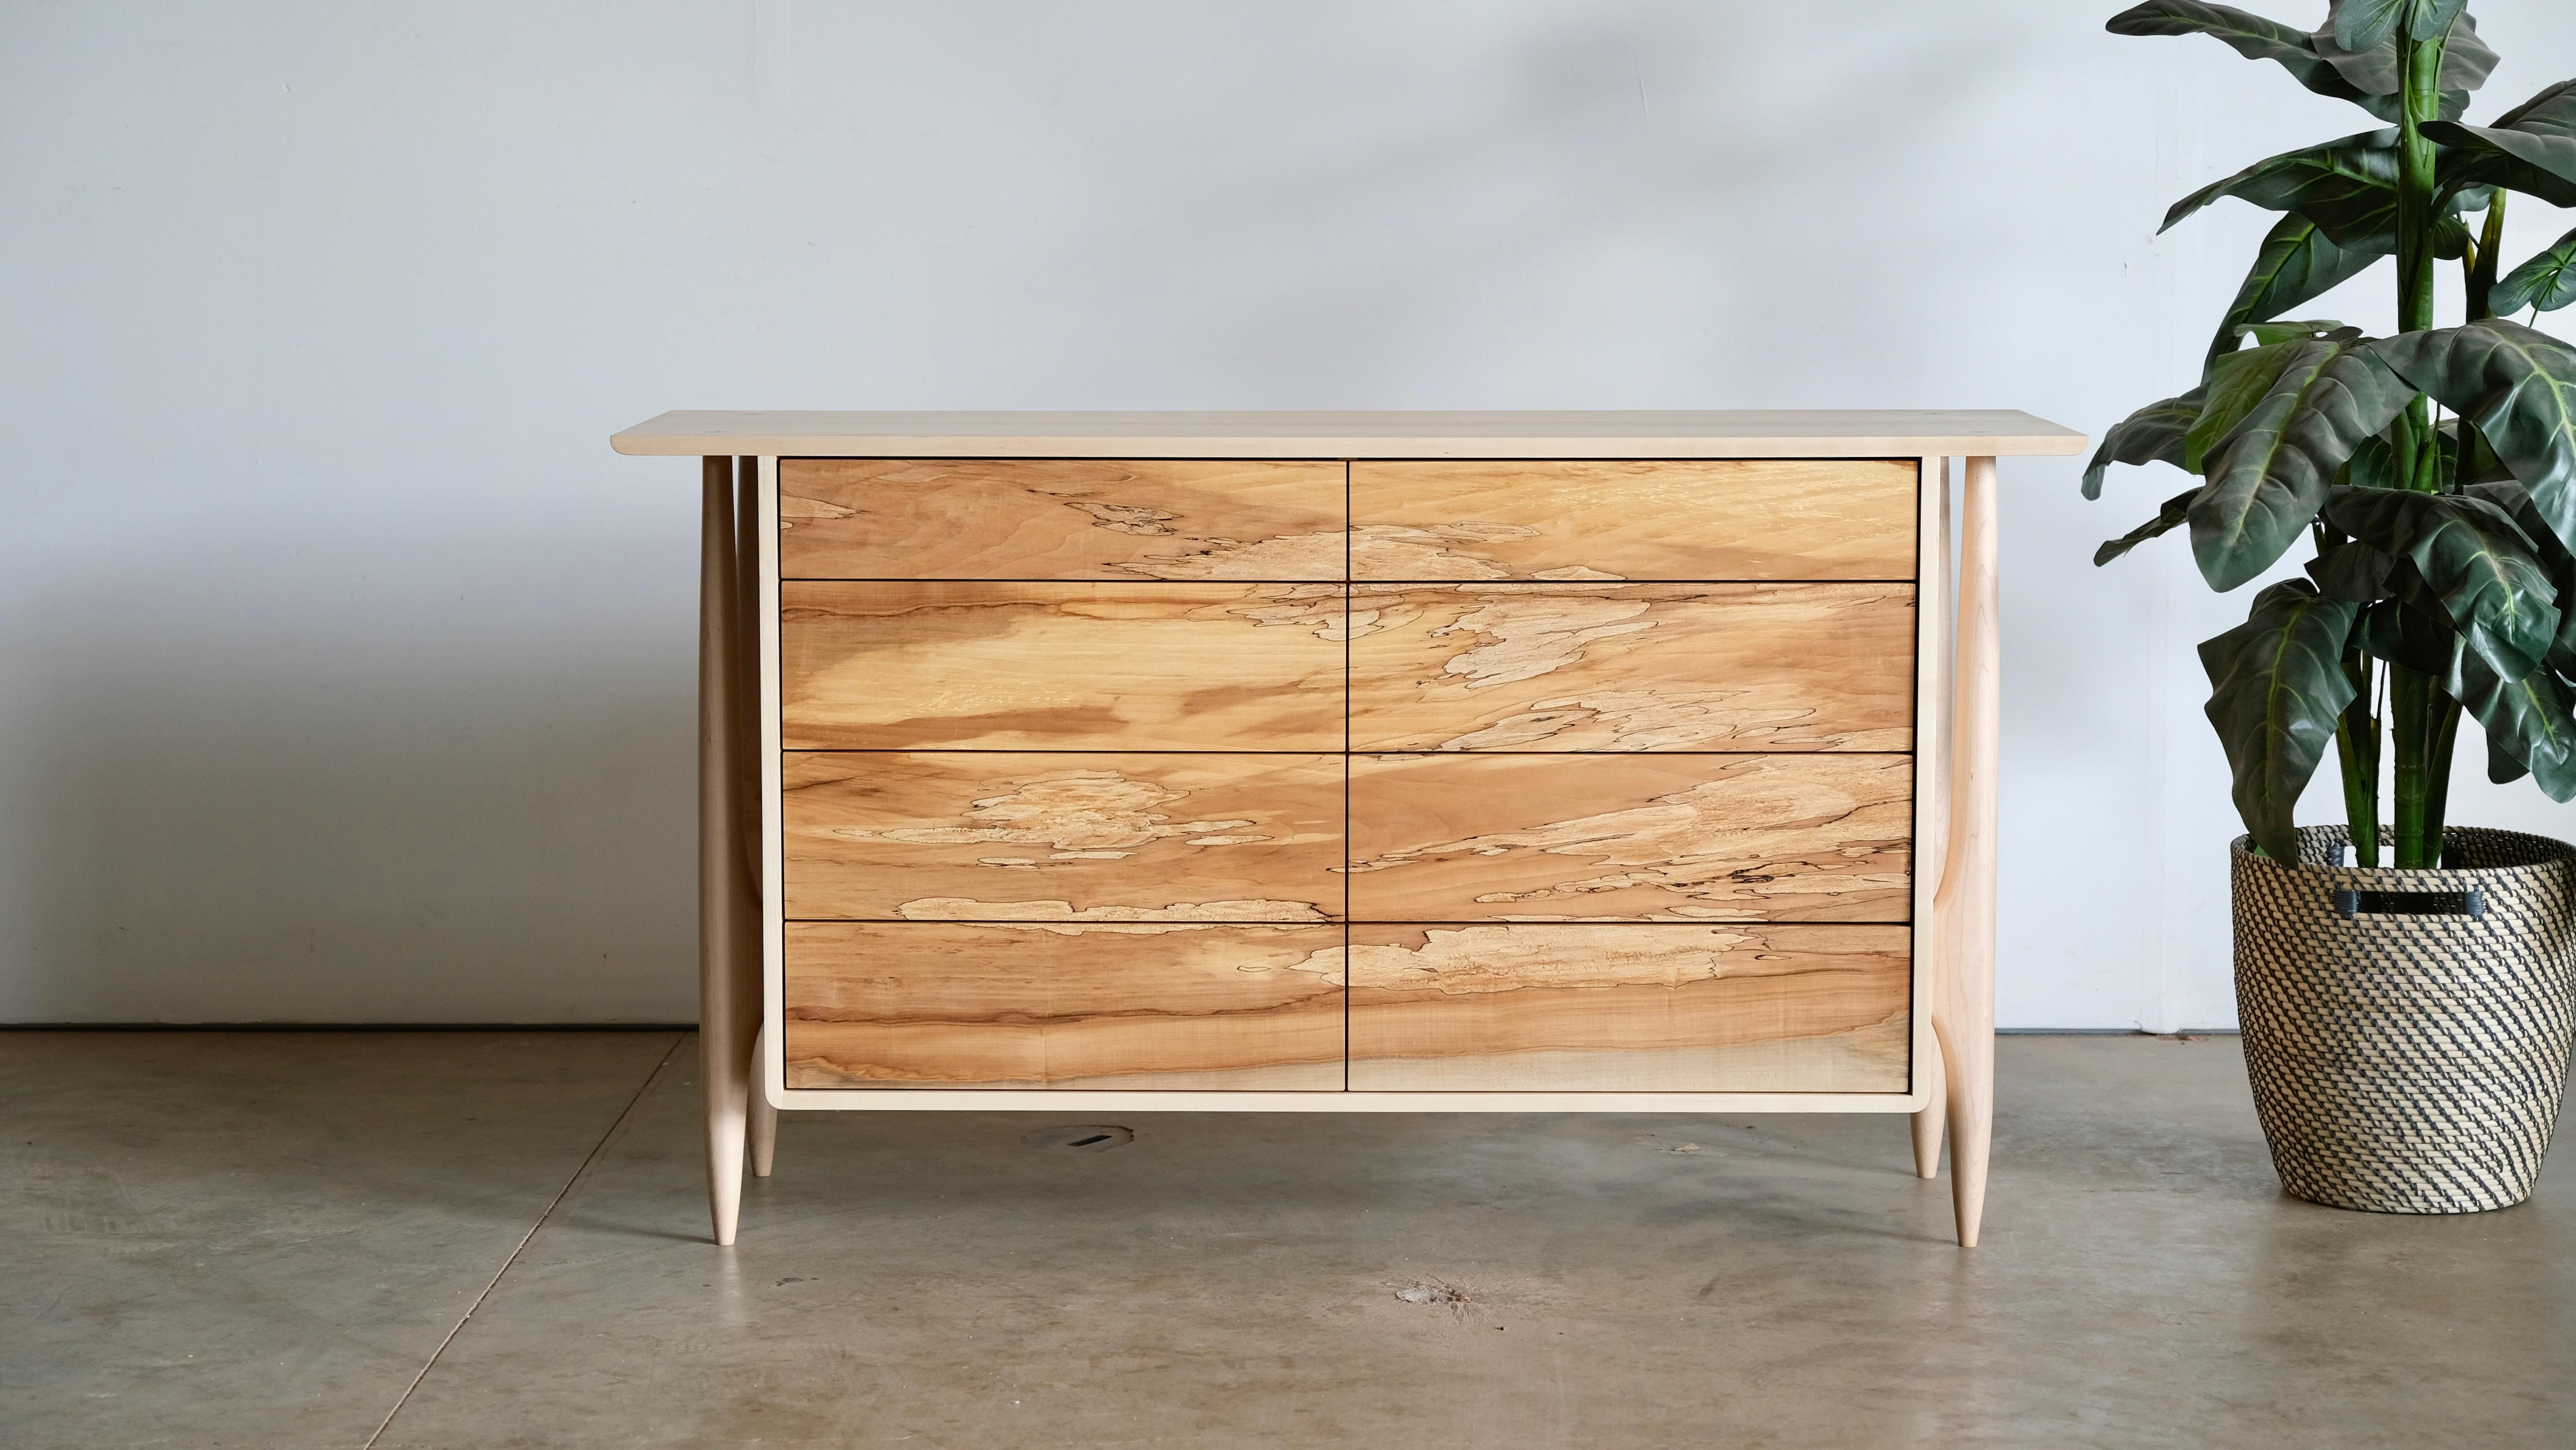 This dresser is made from all solid wood, including the drawers and built using several forms of exposed joinery and hand shaping. I would put this piece closer to a form of art than pure function. The exposed dovetail case, exposed through tenons